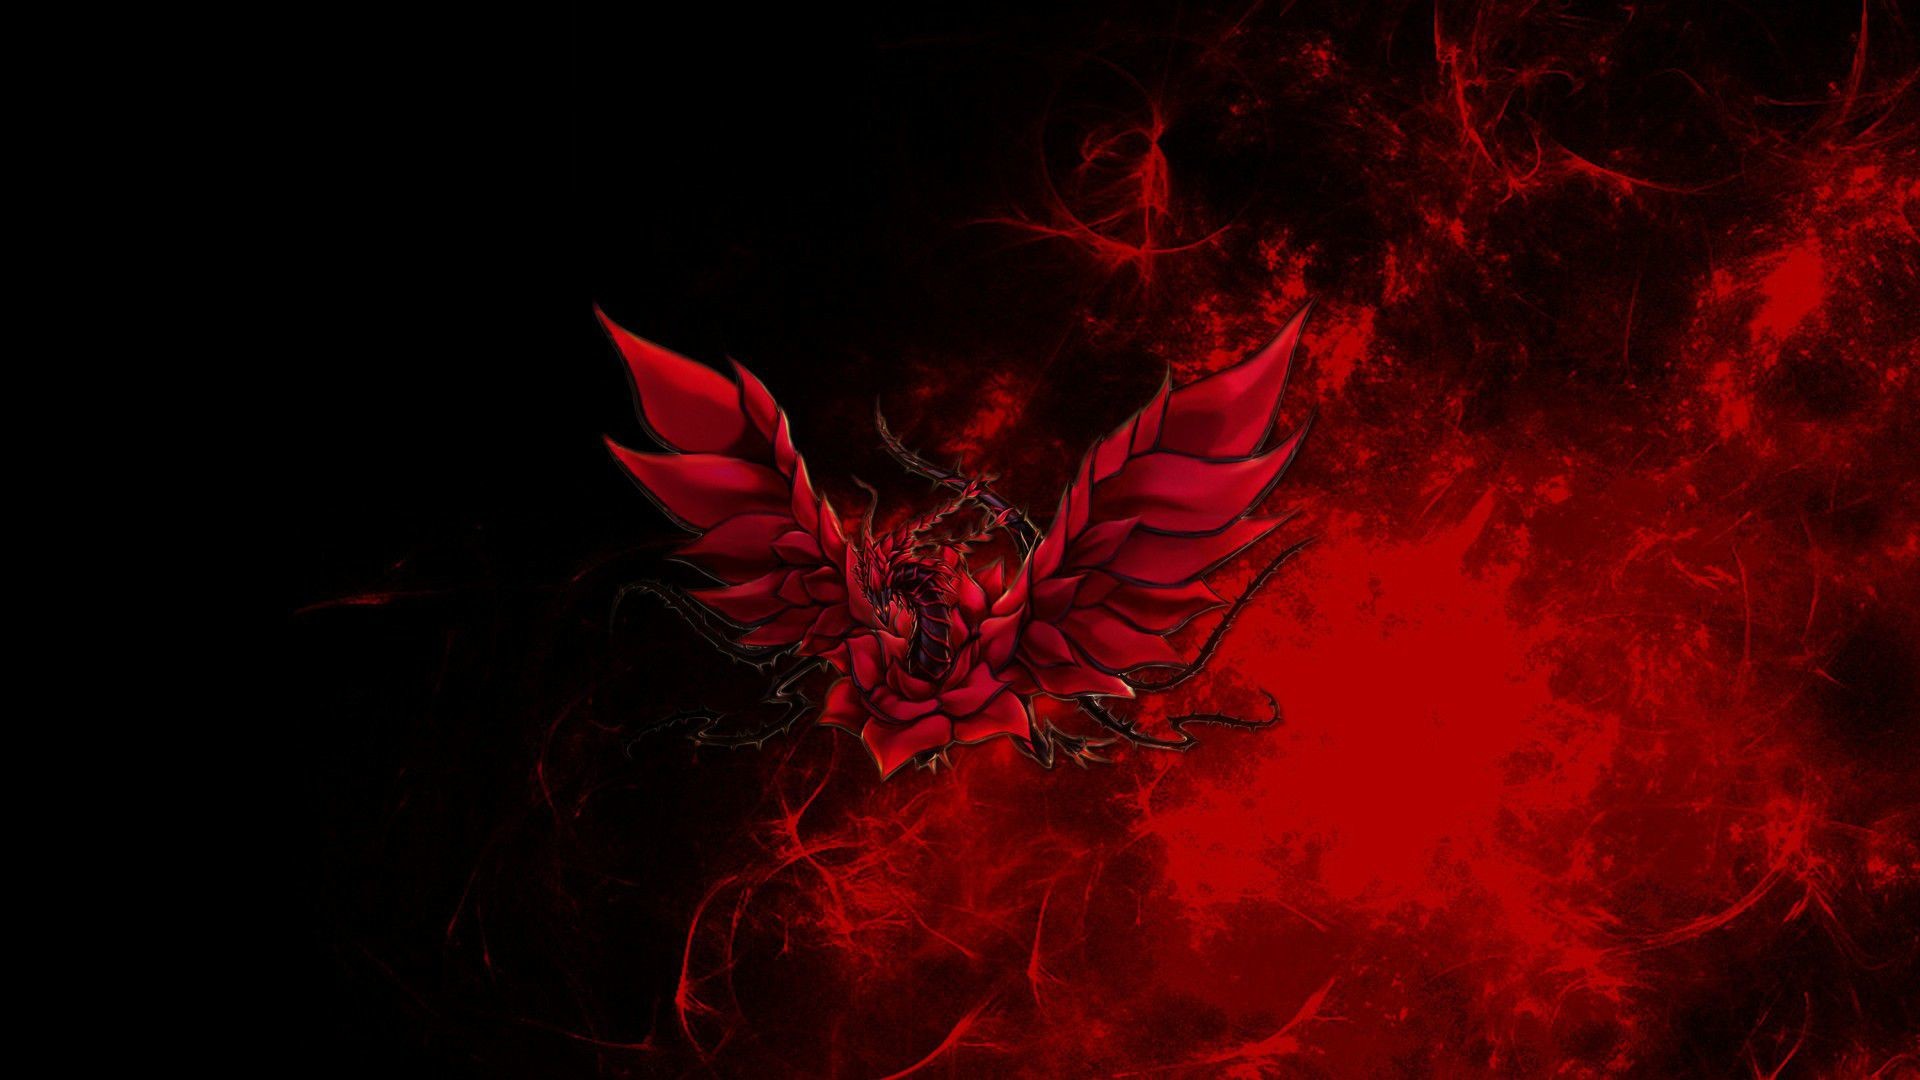 1920x1080 Black red dragon hd images